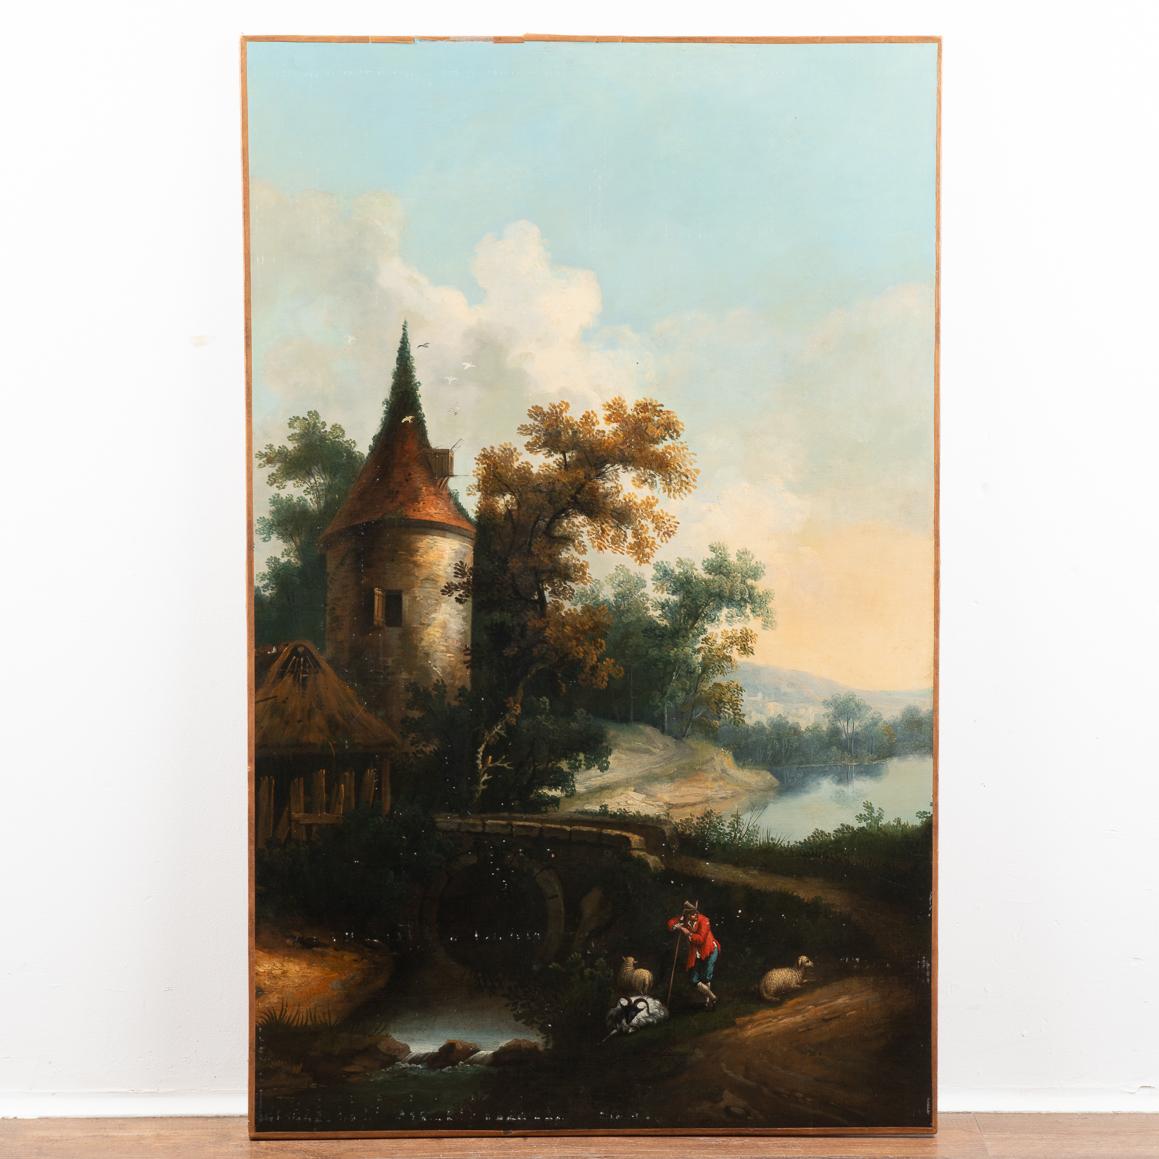 Original oil on canvas painting of an evening scene of a shepherd at a river. Note the beautiful skyline and birds encircling the turret.
Flemish school, 18th century. Unsigned. 4.25' tall, unframed. At some point, brown tape was added along the